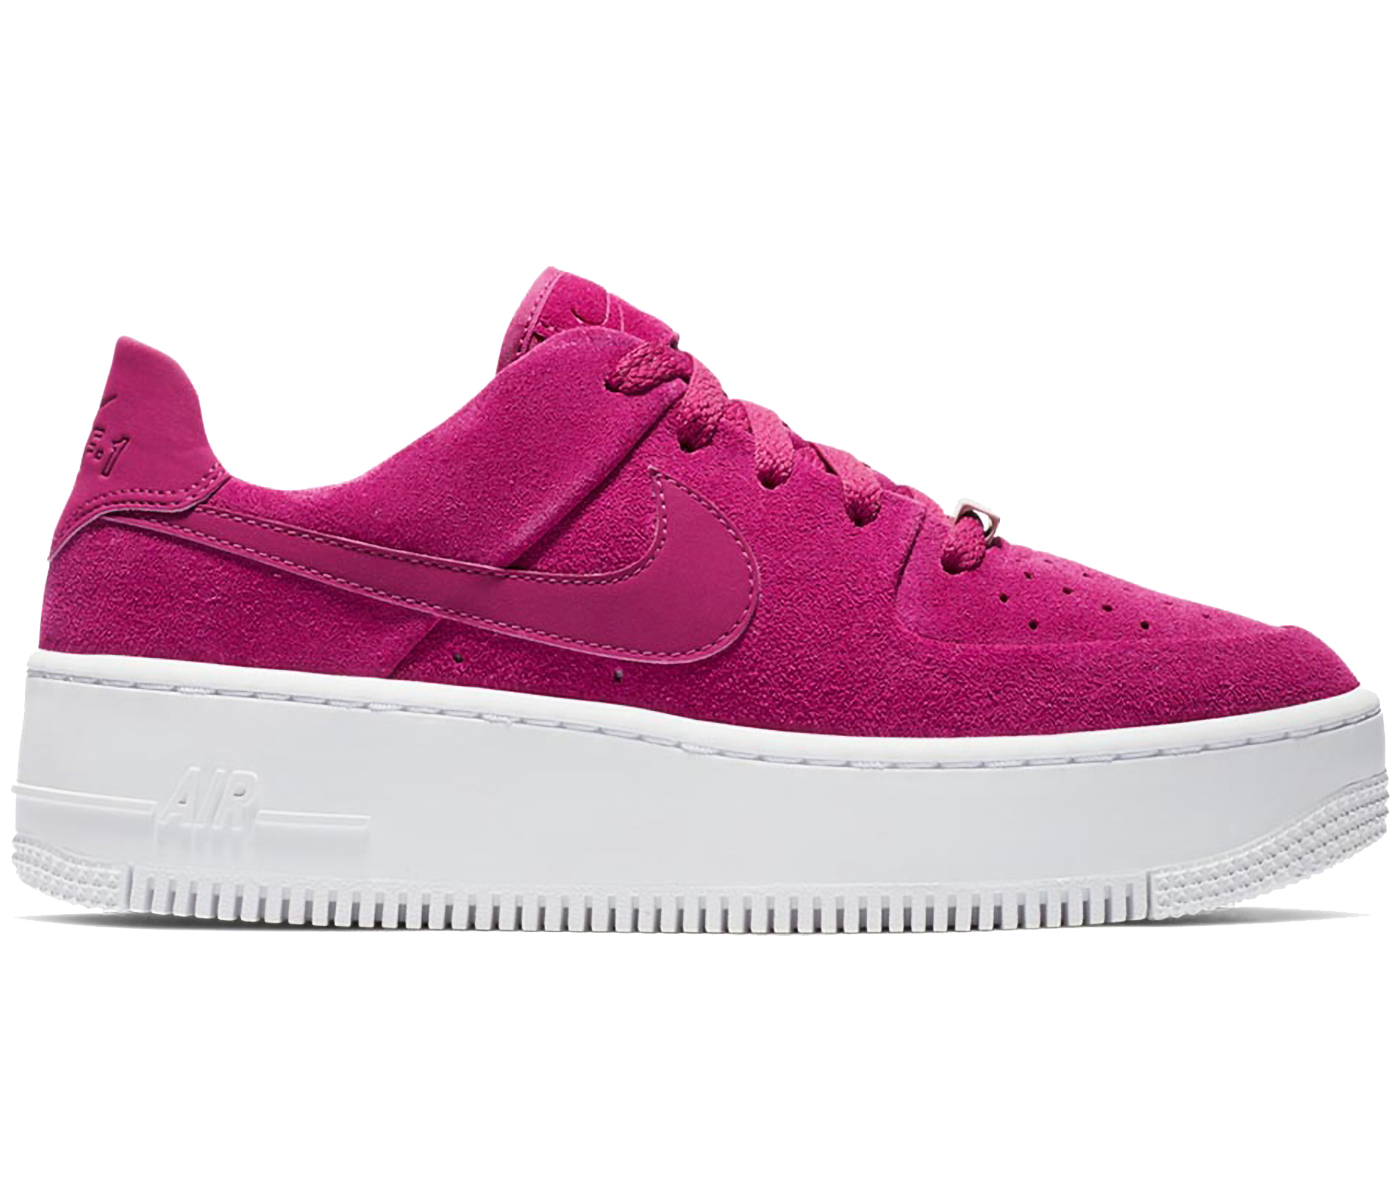 Nike Air Force 1 Sage Low True Berry (Women's) - AR5339-600 - US